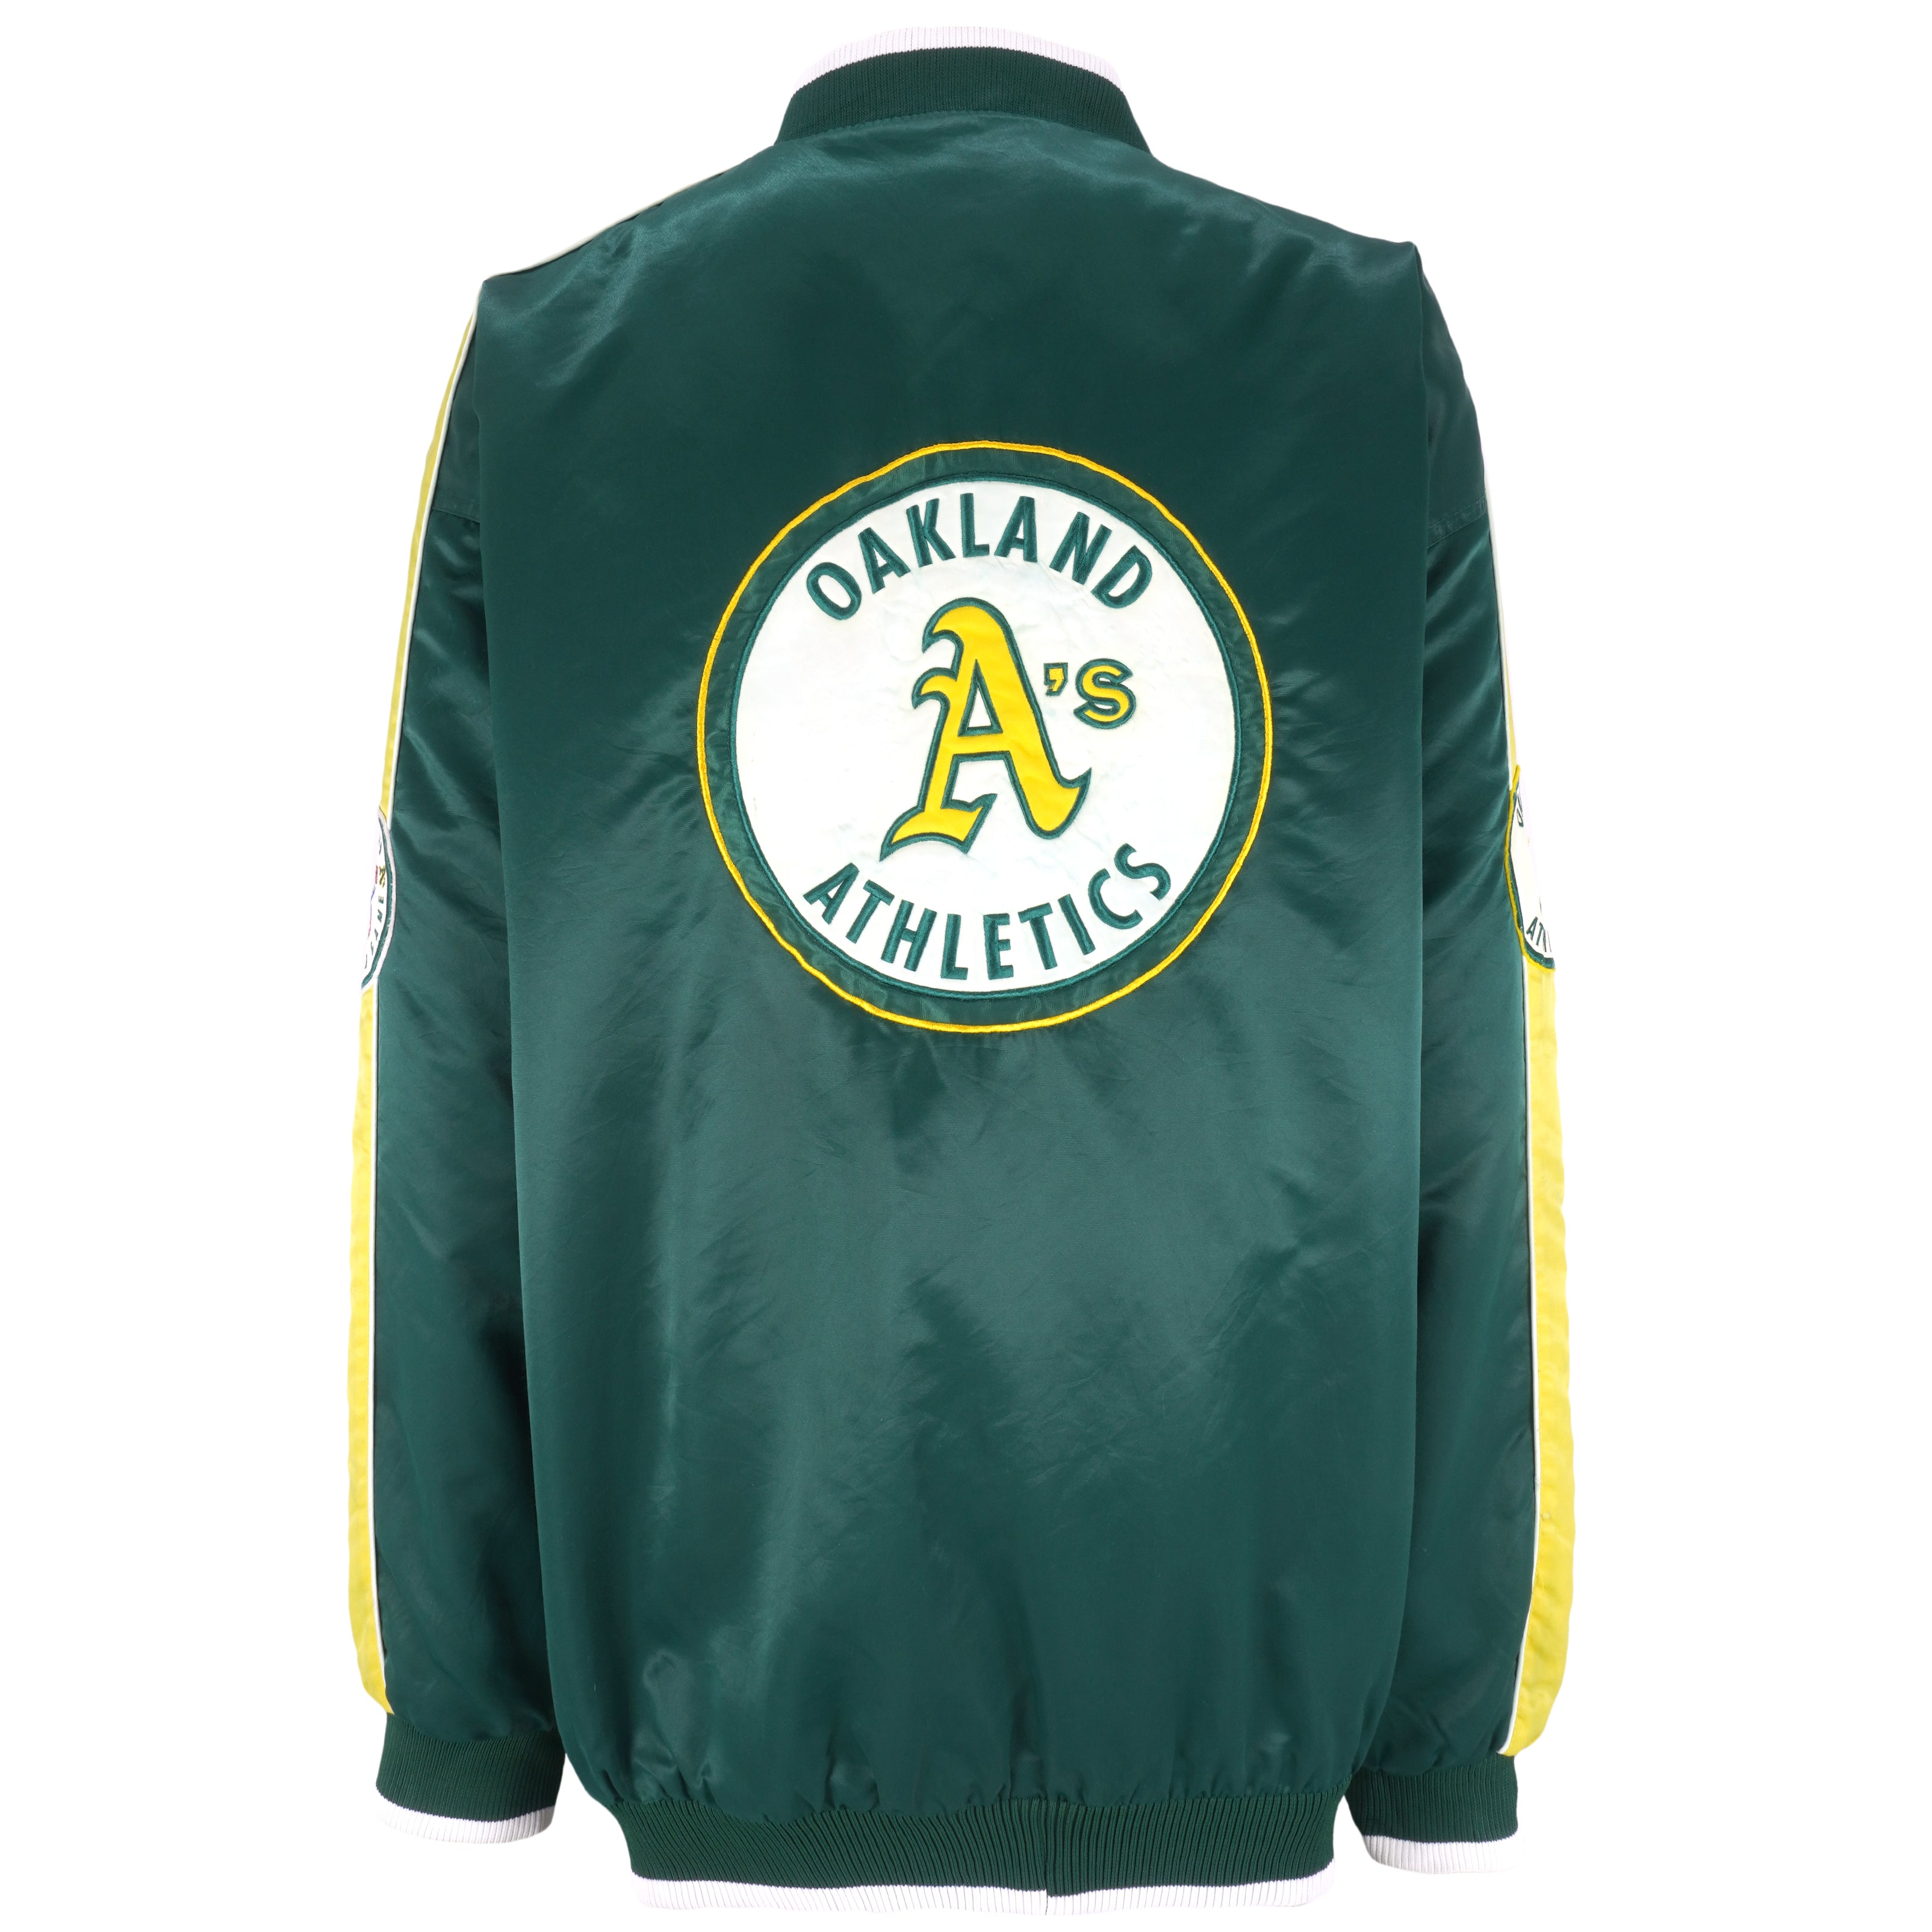 Oakland Athletics Cooperstown Collection Nike MLB Jersey Green